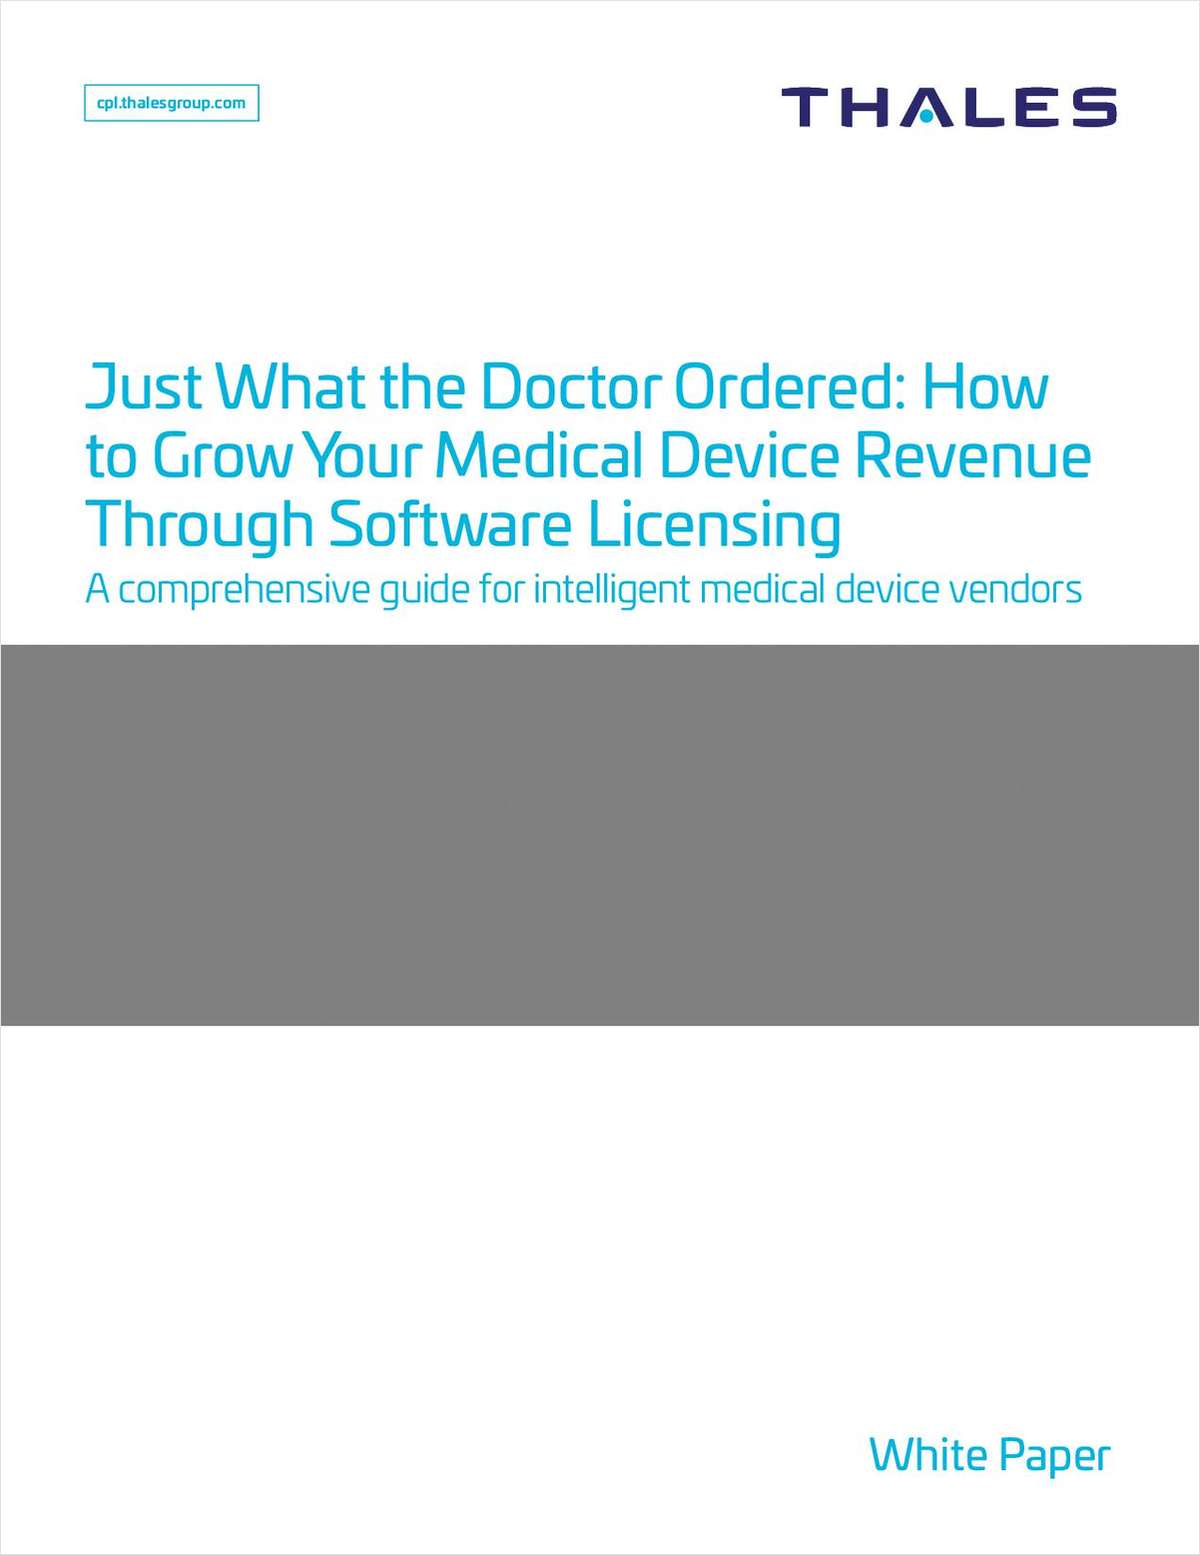 Just What the Doctor Ordered: How to Grow Your Medical Device Revenue Through Software Licensing